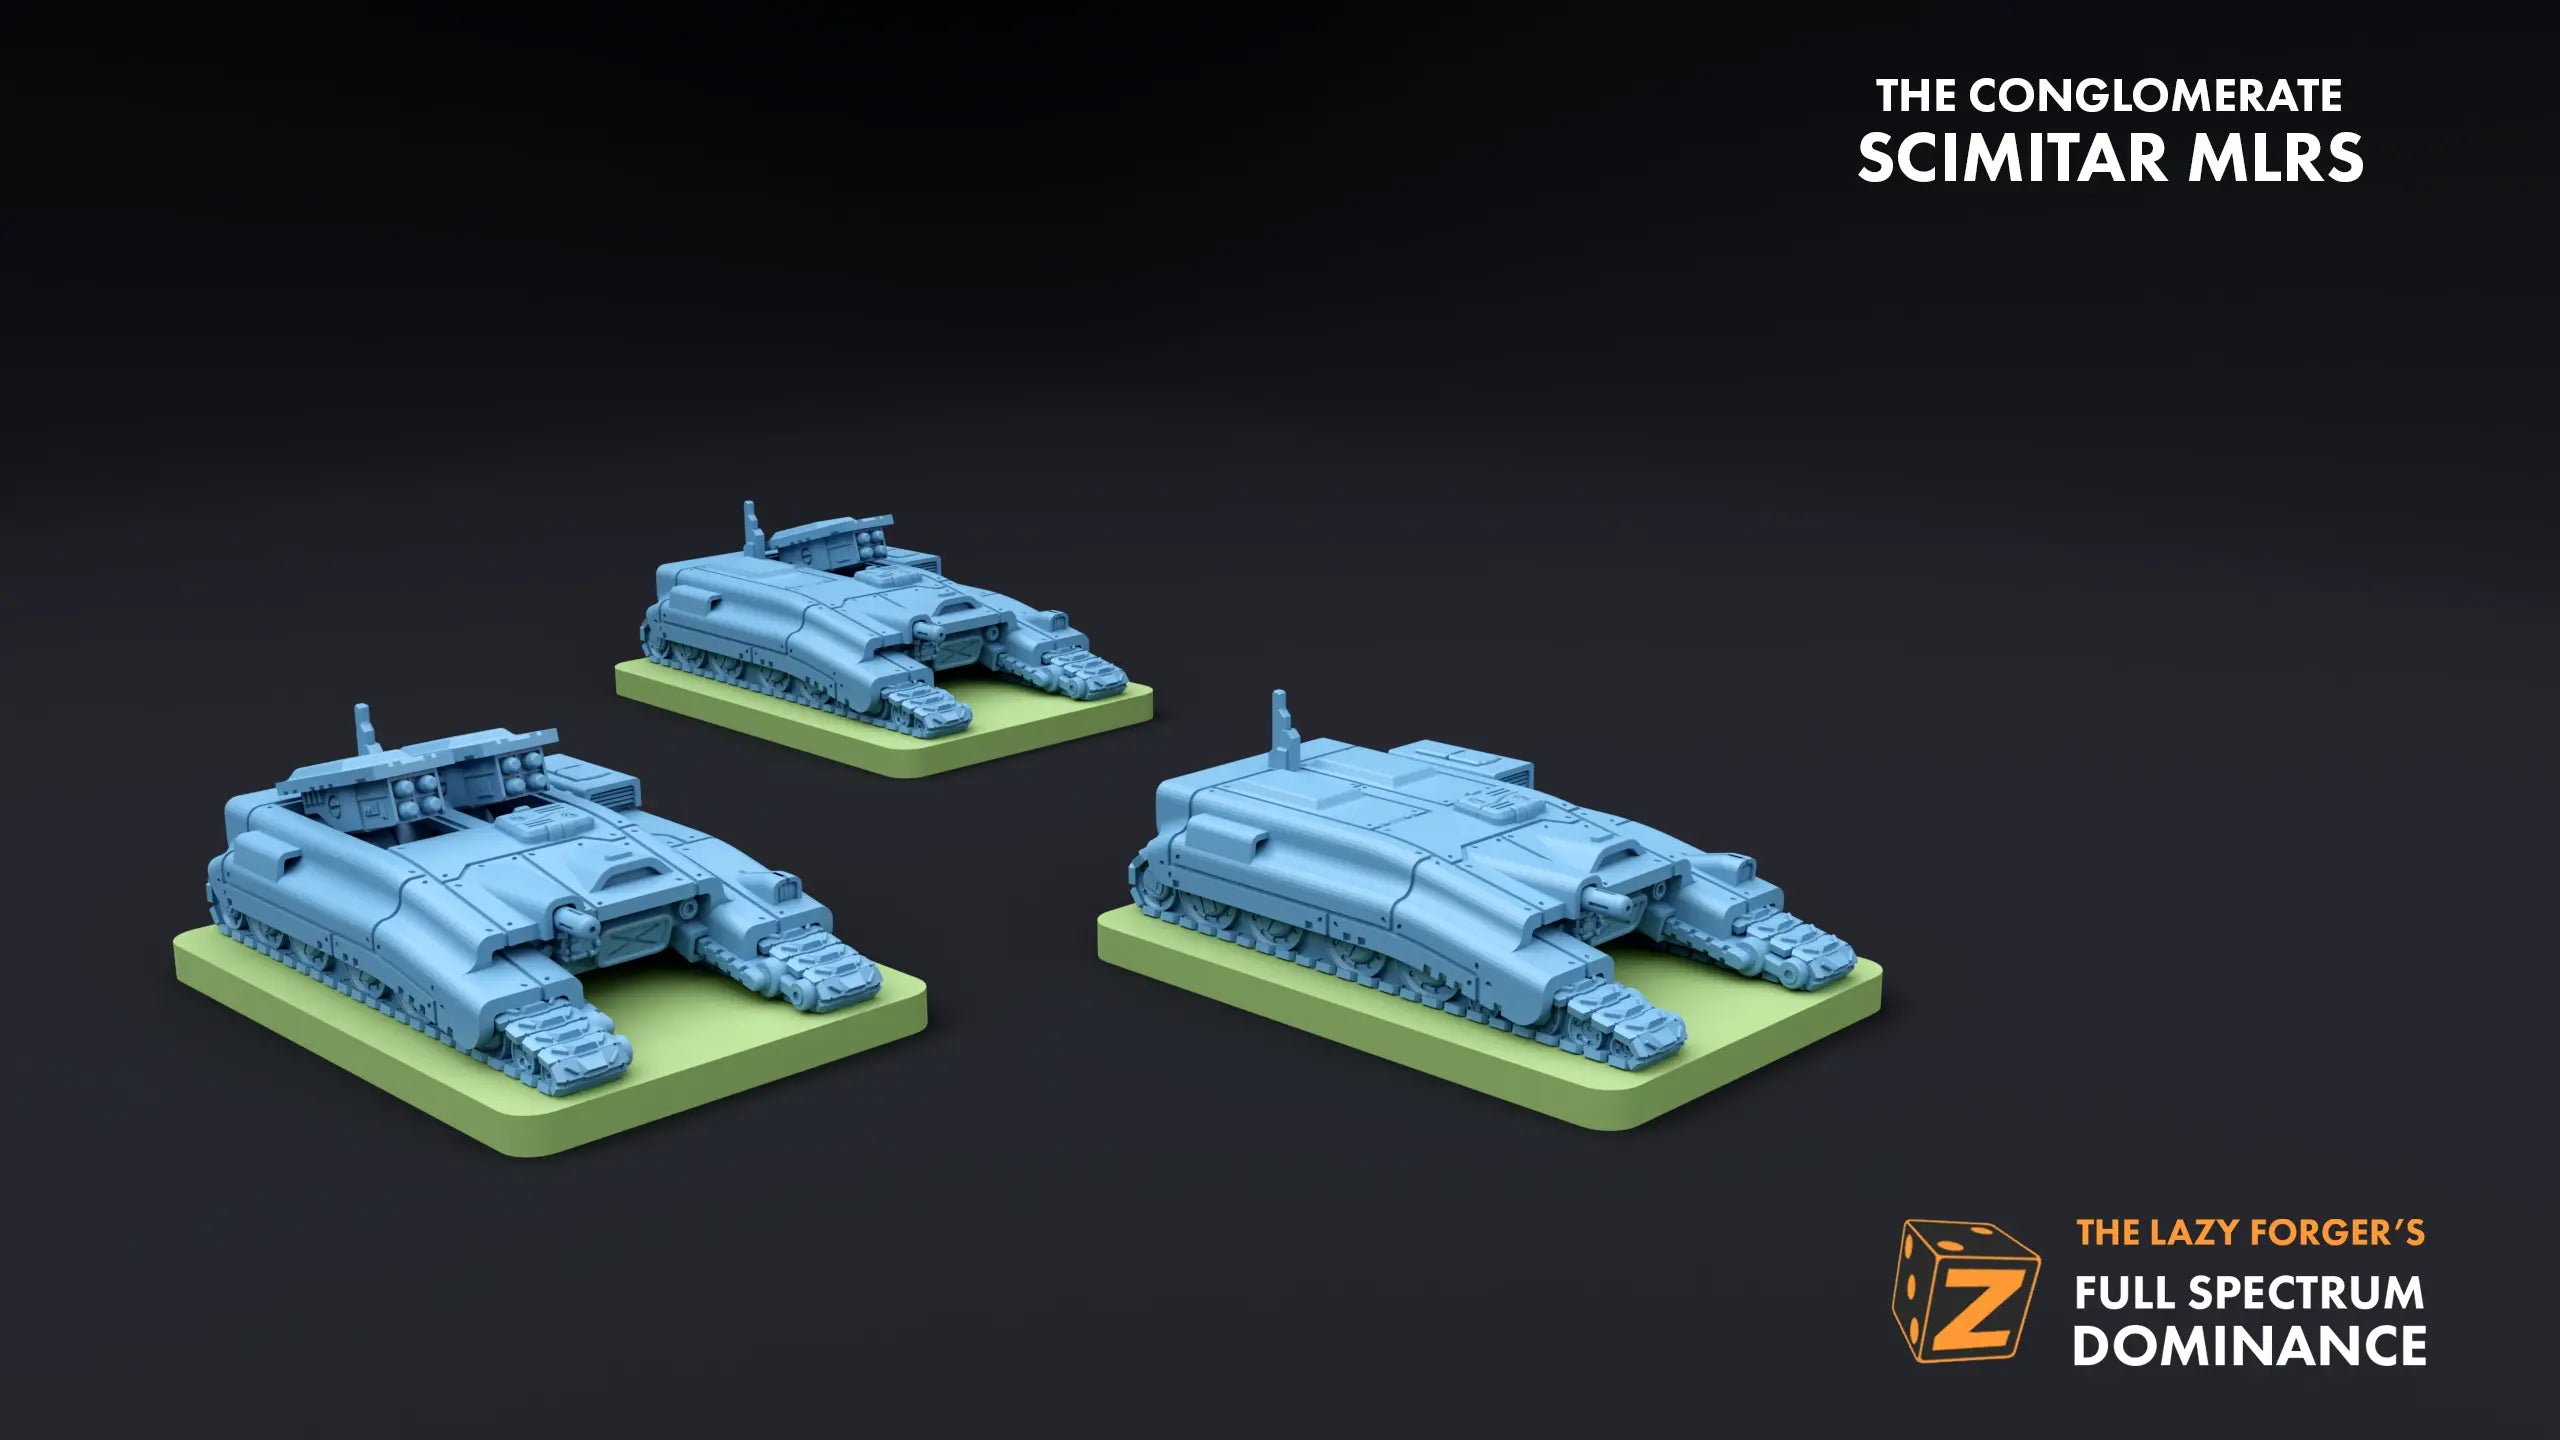 Scimitar MRLS Pack (3) - The Conglomerate The Lazy Forger